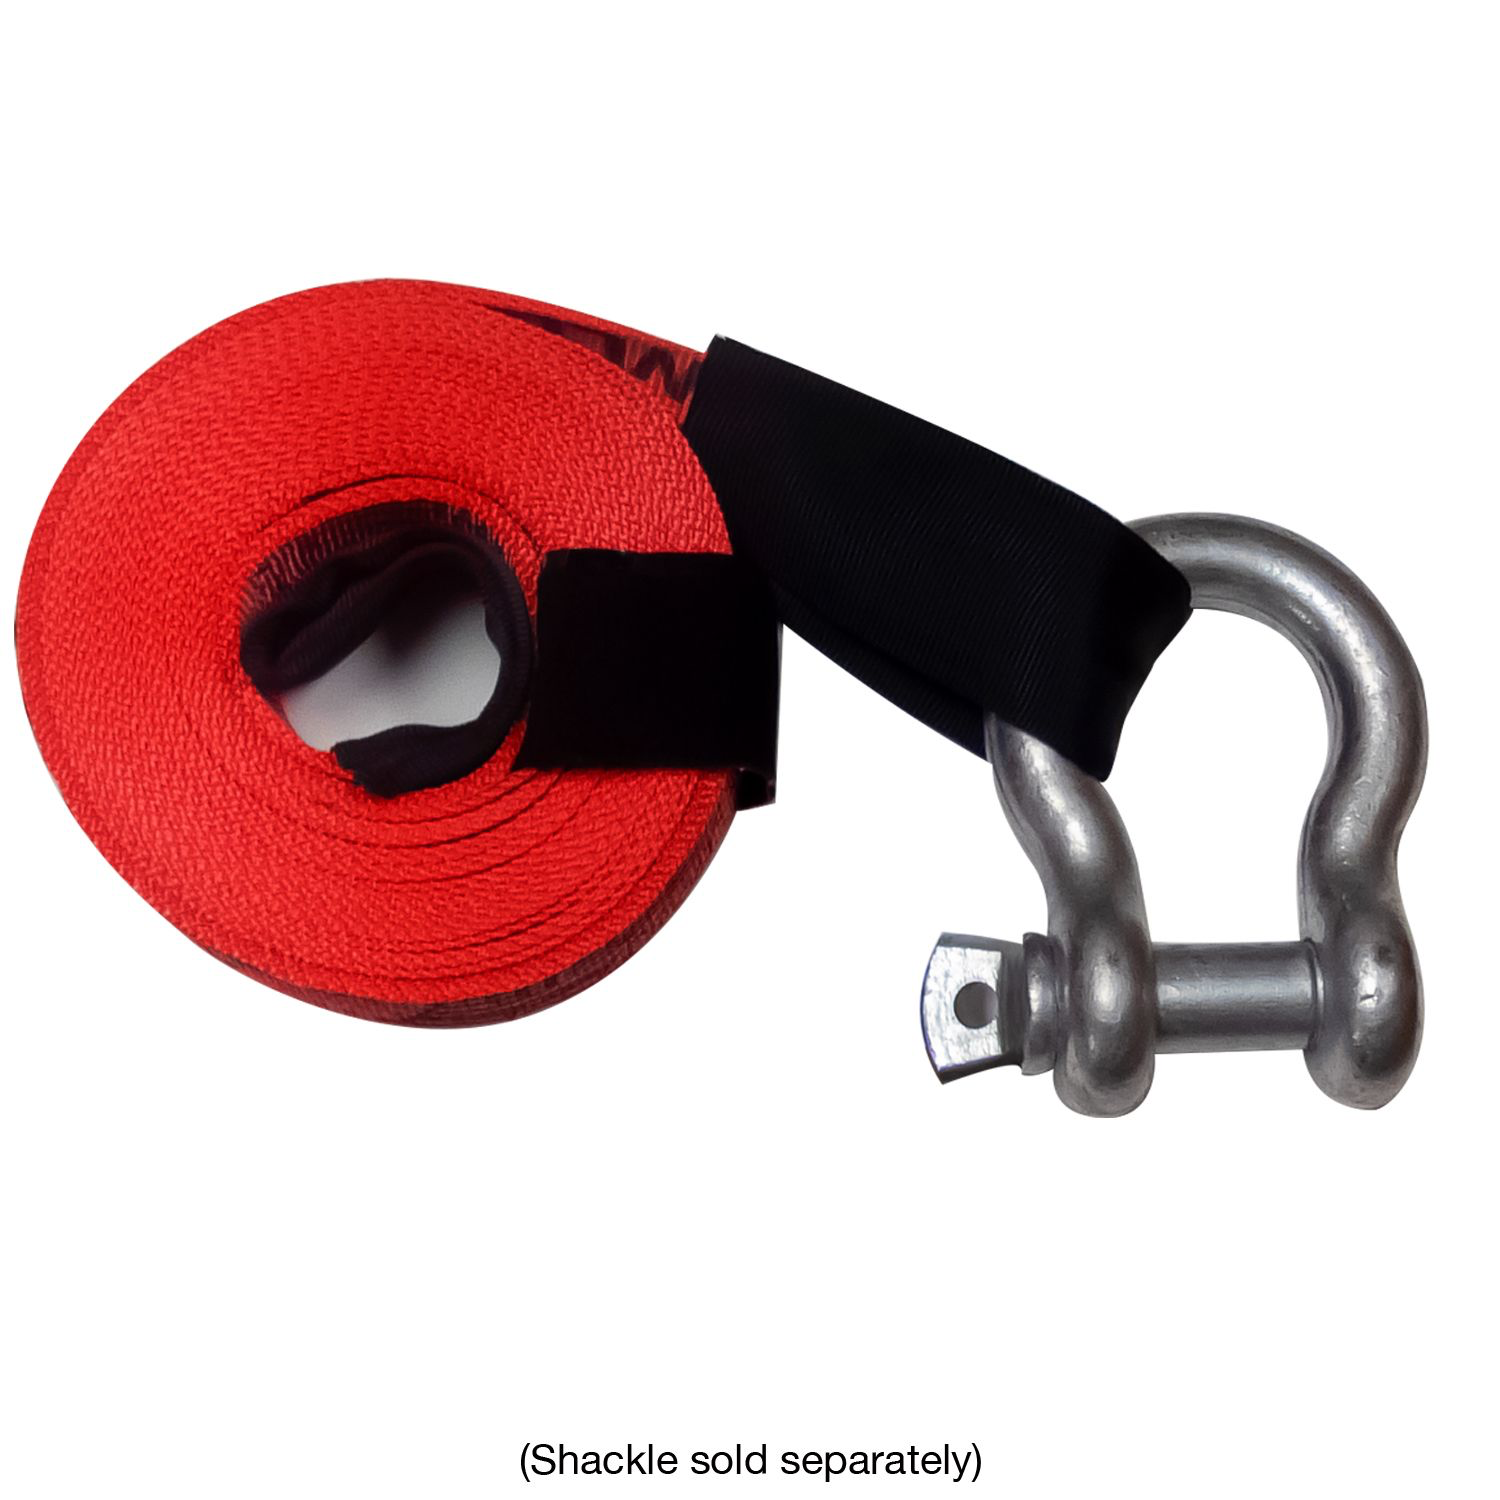 Snap-Loc SLTT230K10R 2 in. x 30 ft. Tow & Lifting Strap with Hook & Loop Storage Fastener, 10,000 lbs